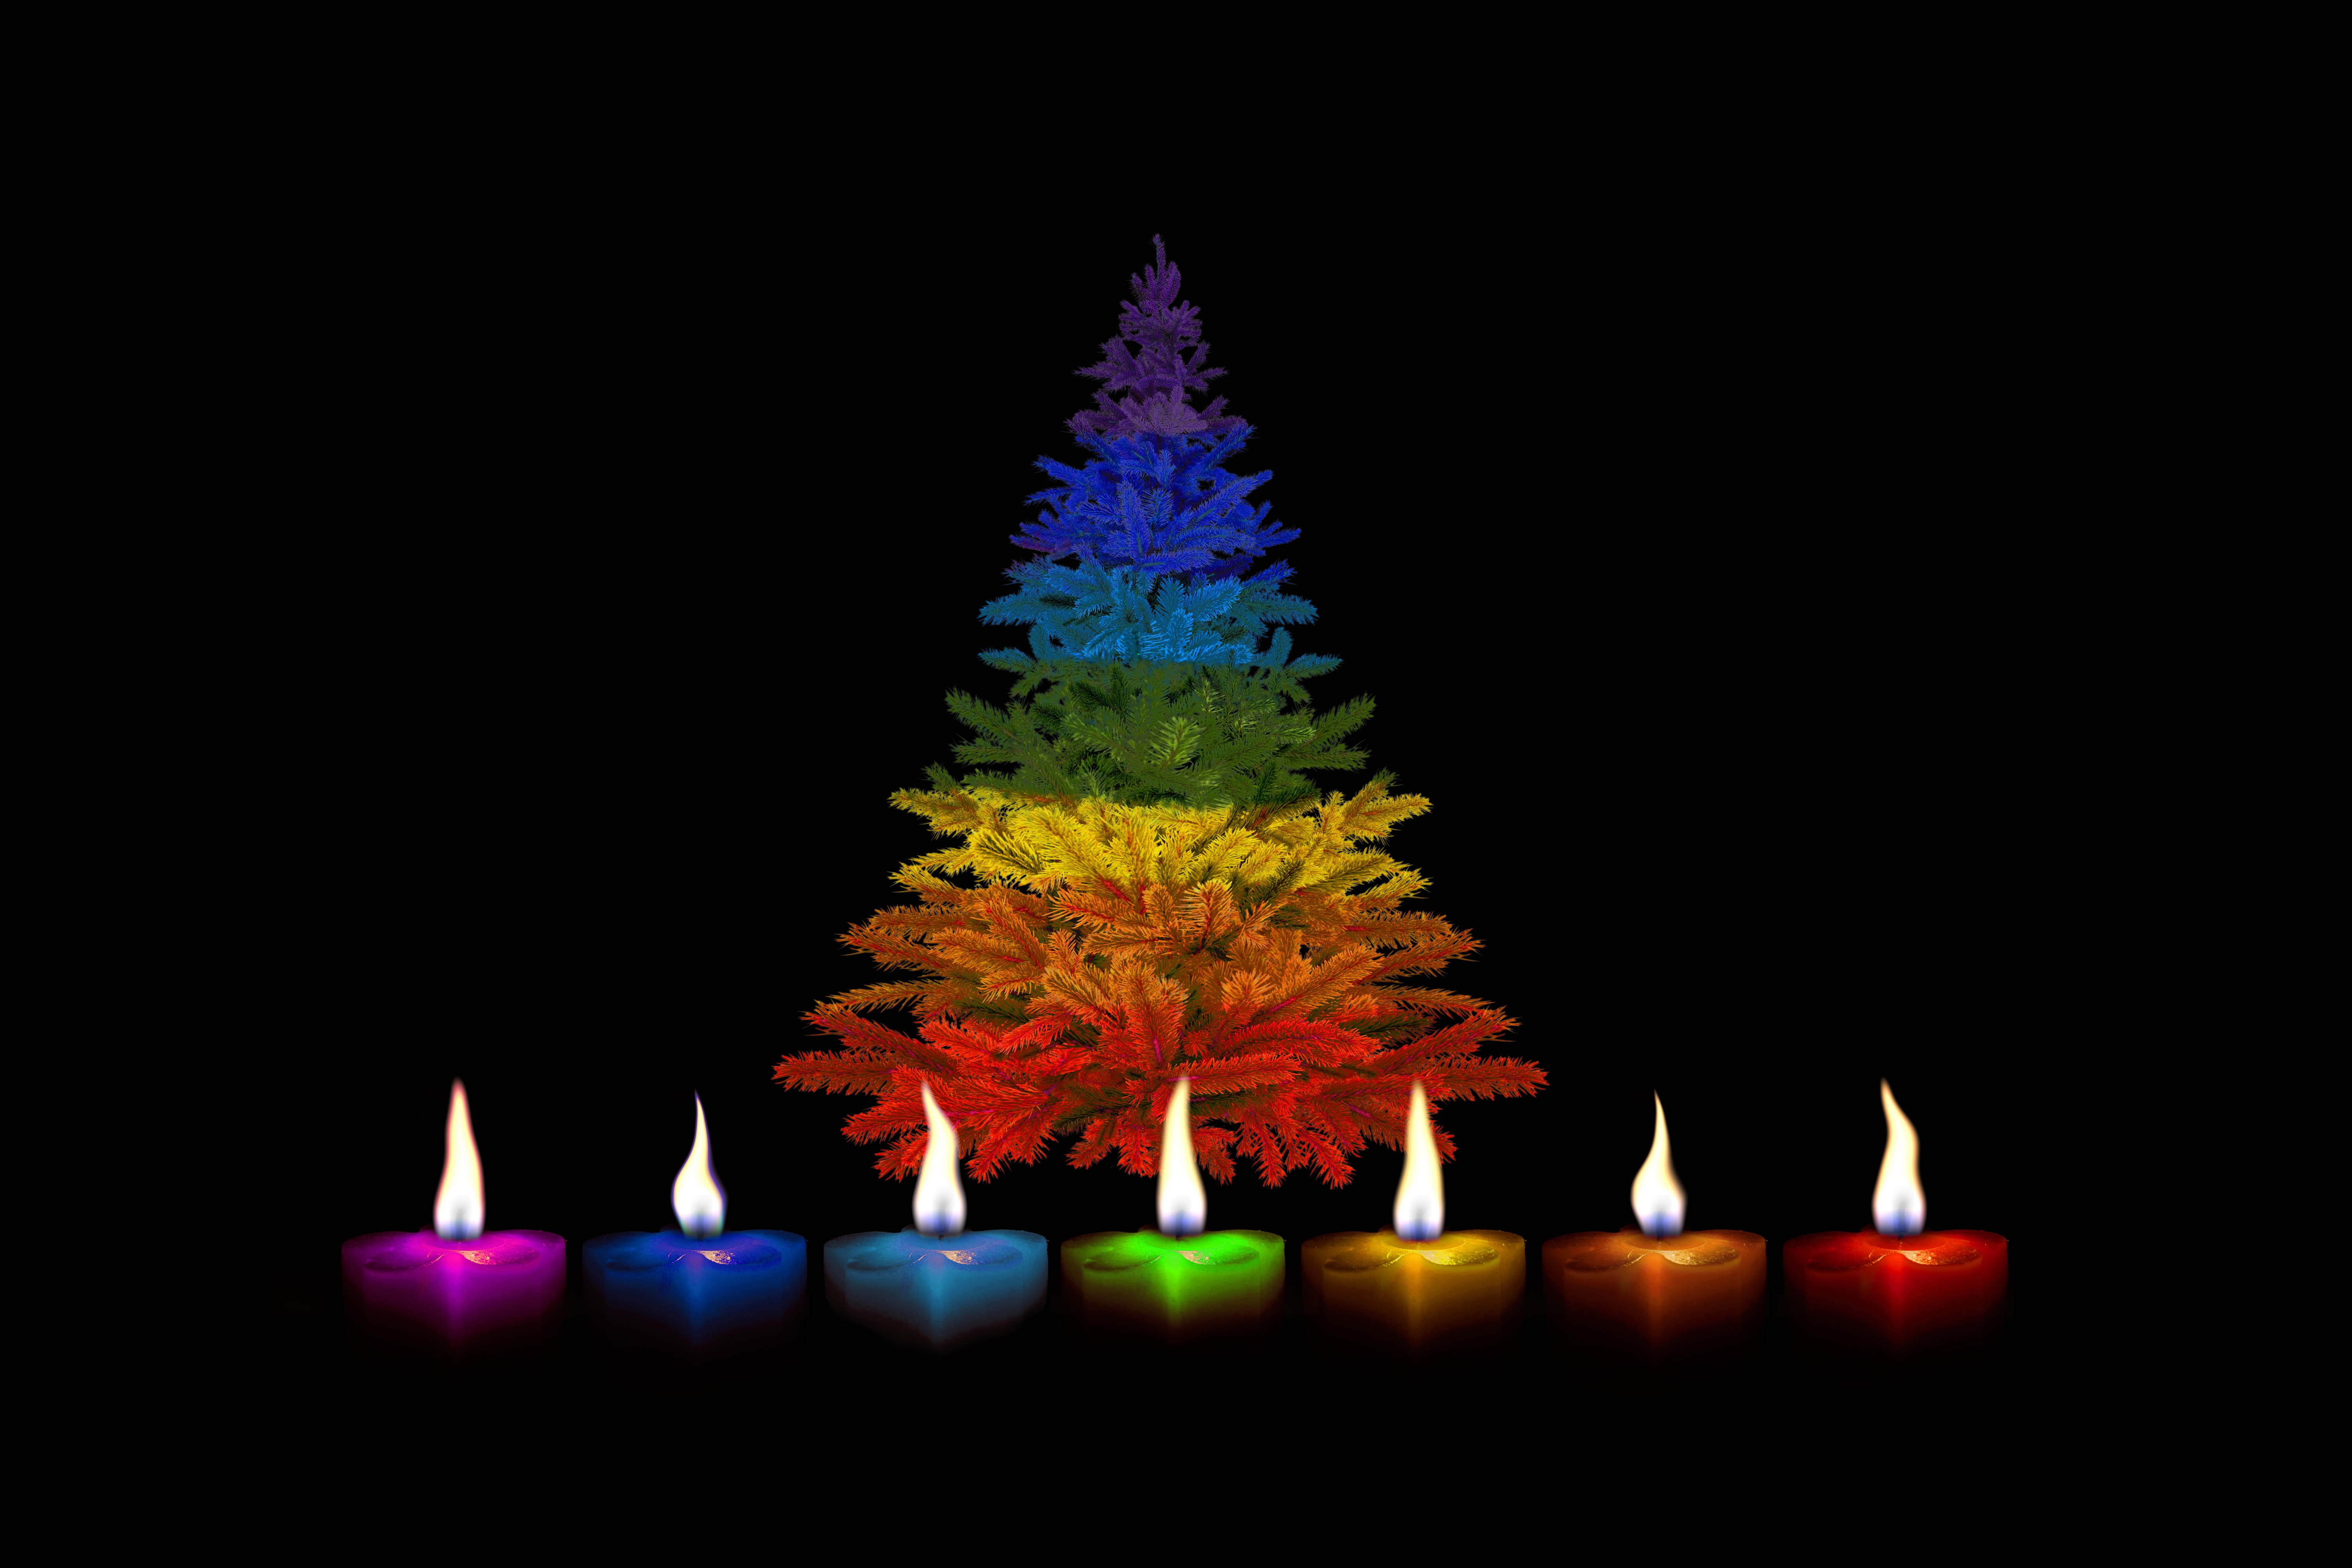 Colourful Christmas Tree and Candles 4k Ultra HD Wallpaper